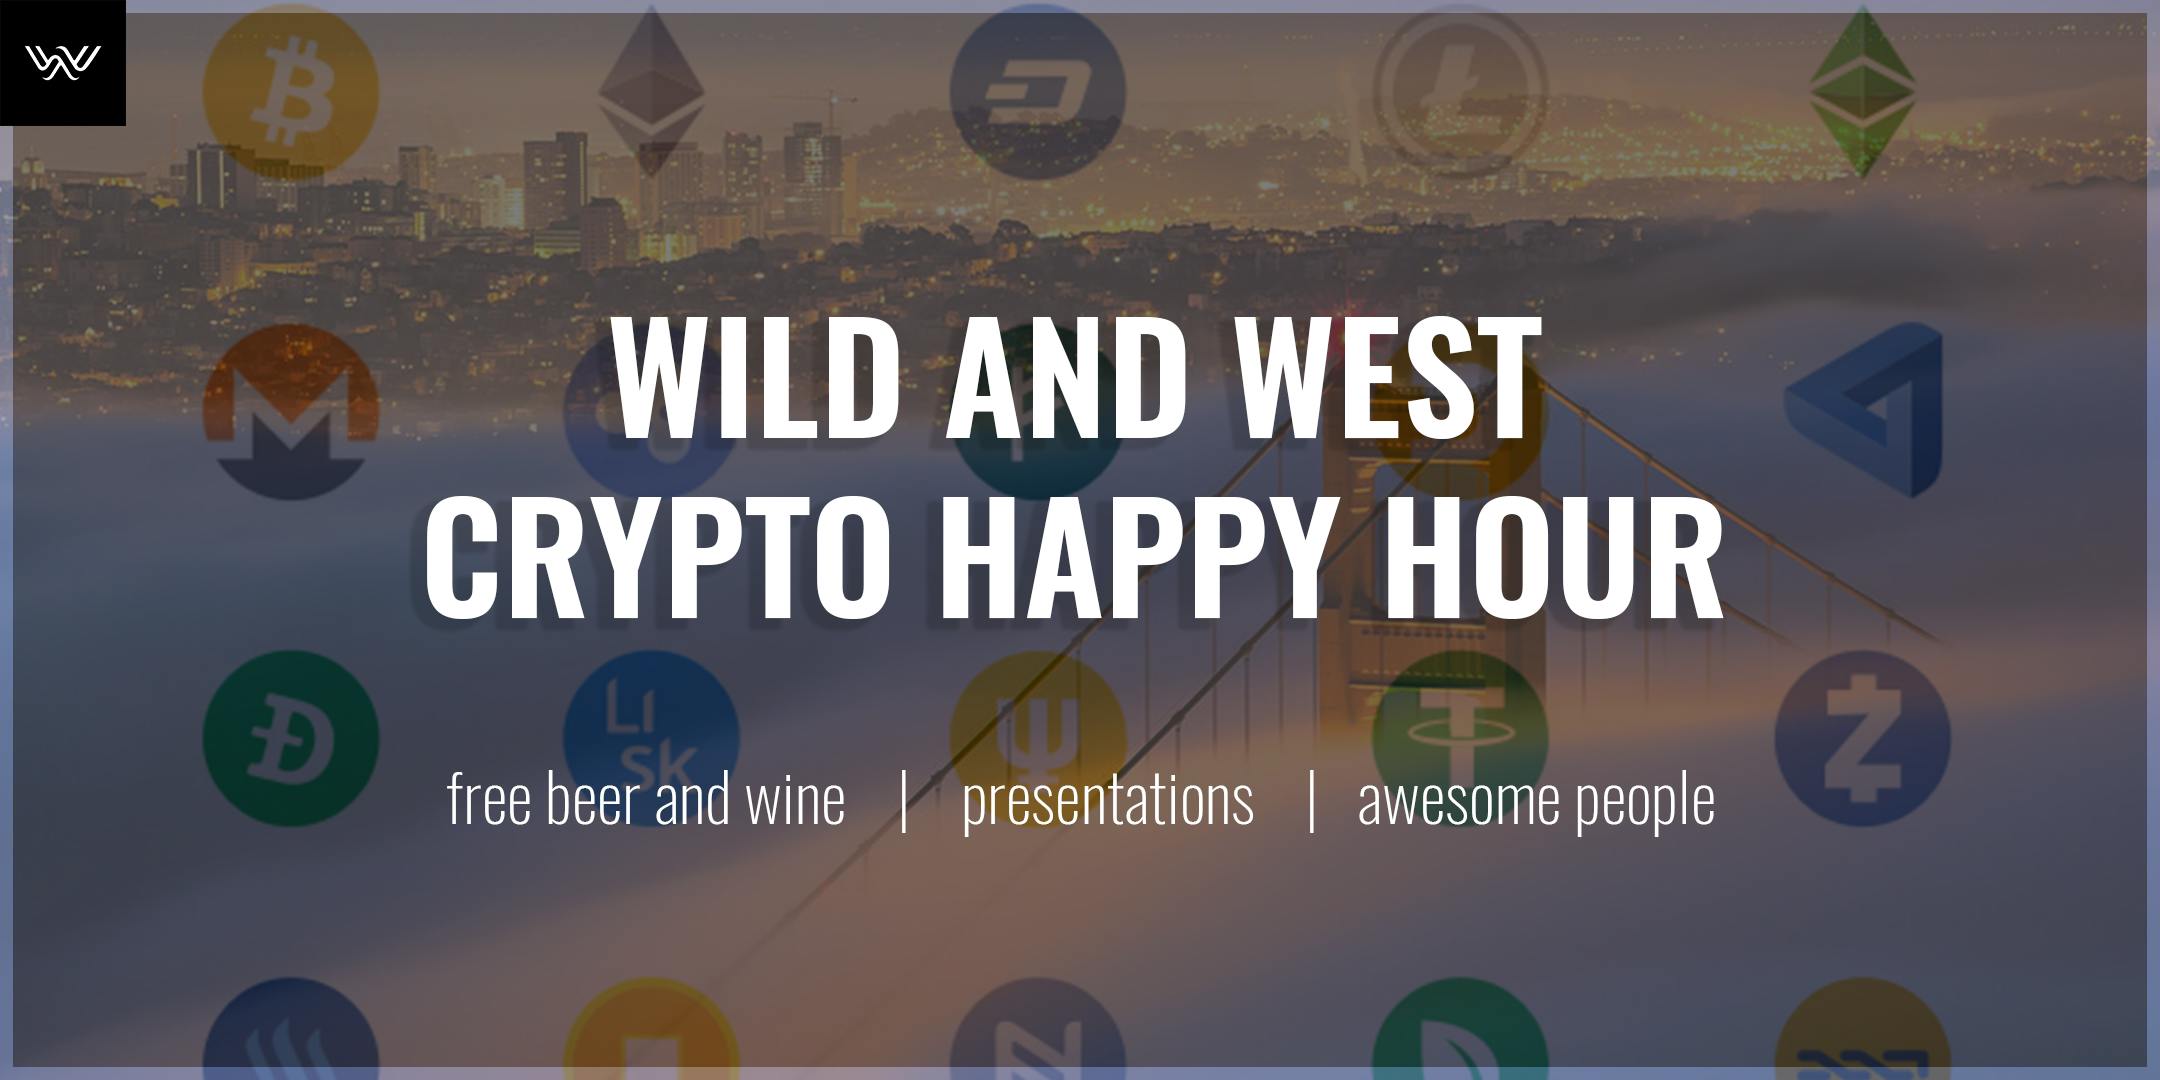 Wild and West Crypto Happy Hour With Presentations at Bravado (Free Drinks)